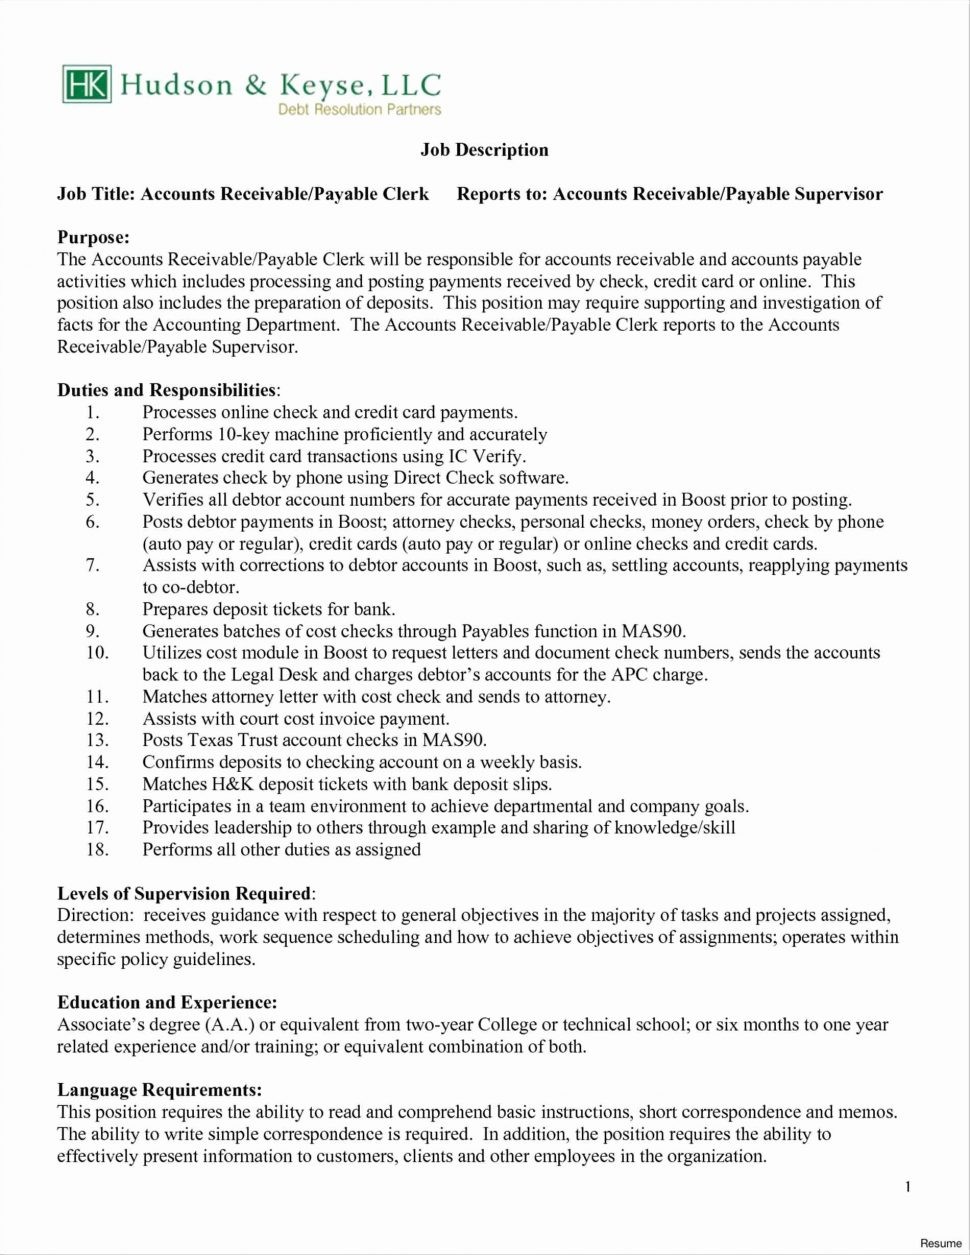 General Objective For Resume Invoice Best Objective Resume Sample Statements Examples For Simple general objective for resume|wikiresume.com